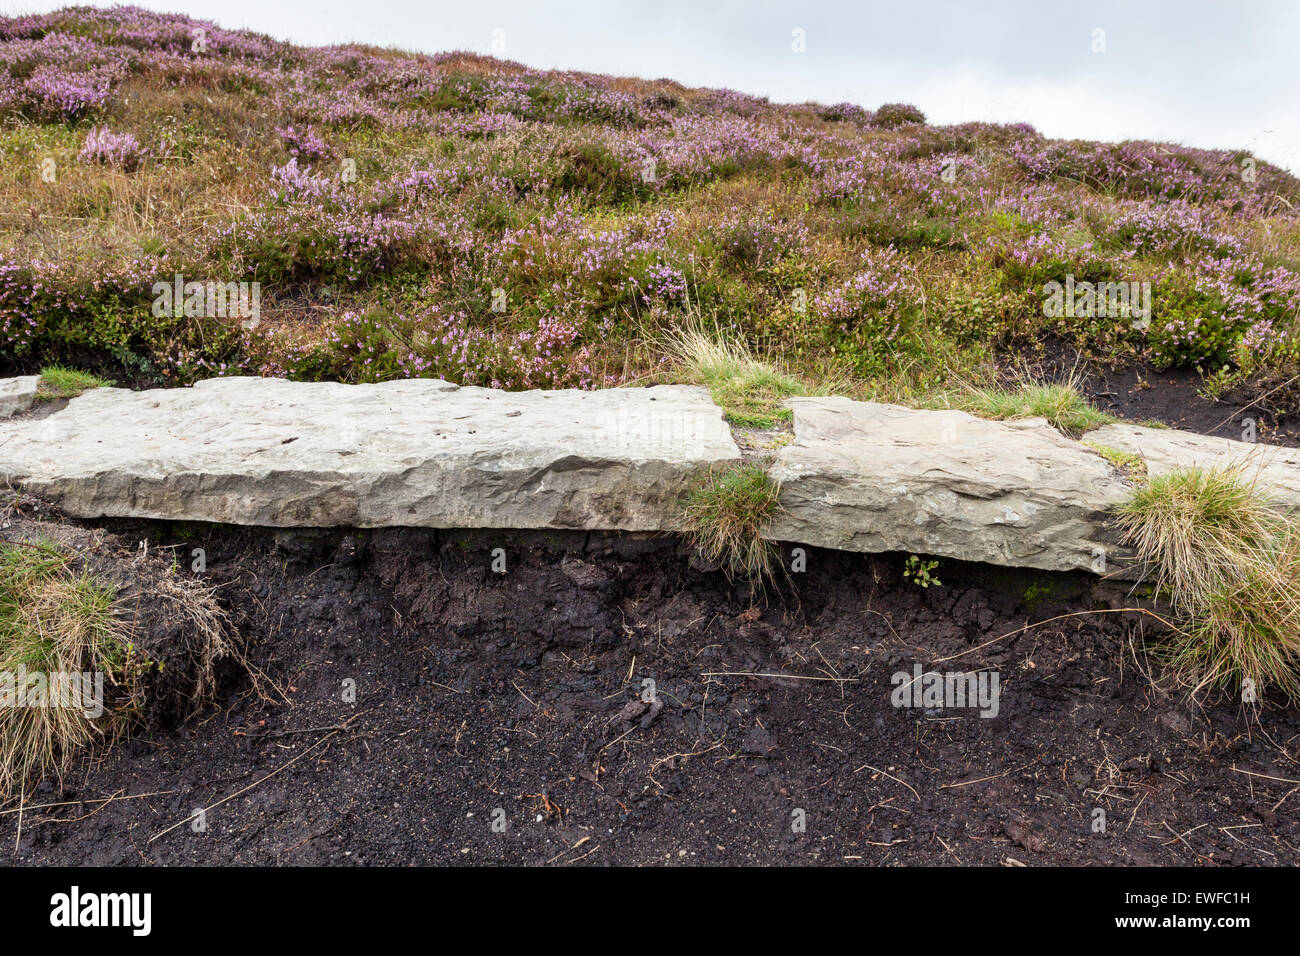 Side on view of a paved stone path laid over an area of eroded moor as part of a moorland restoration project. Kinder Scout, Derbyshire, England, UK Stock Photo